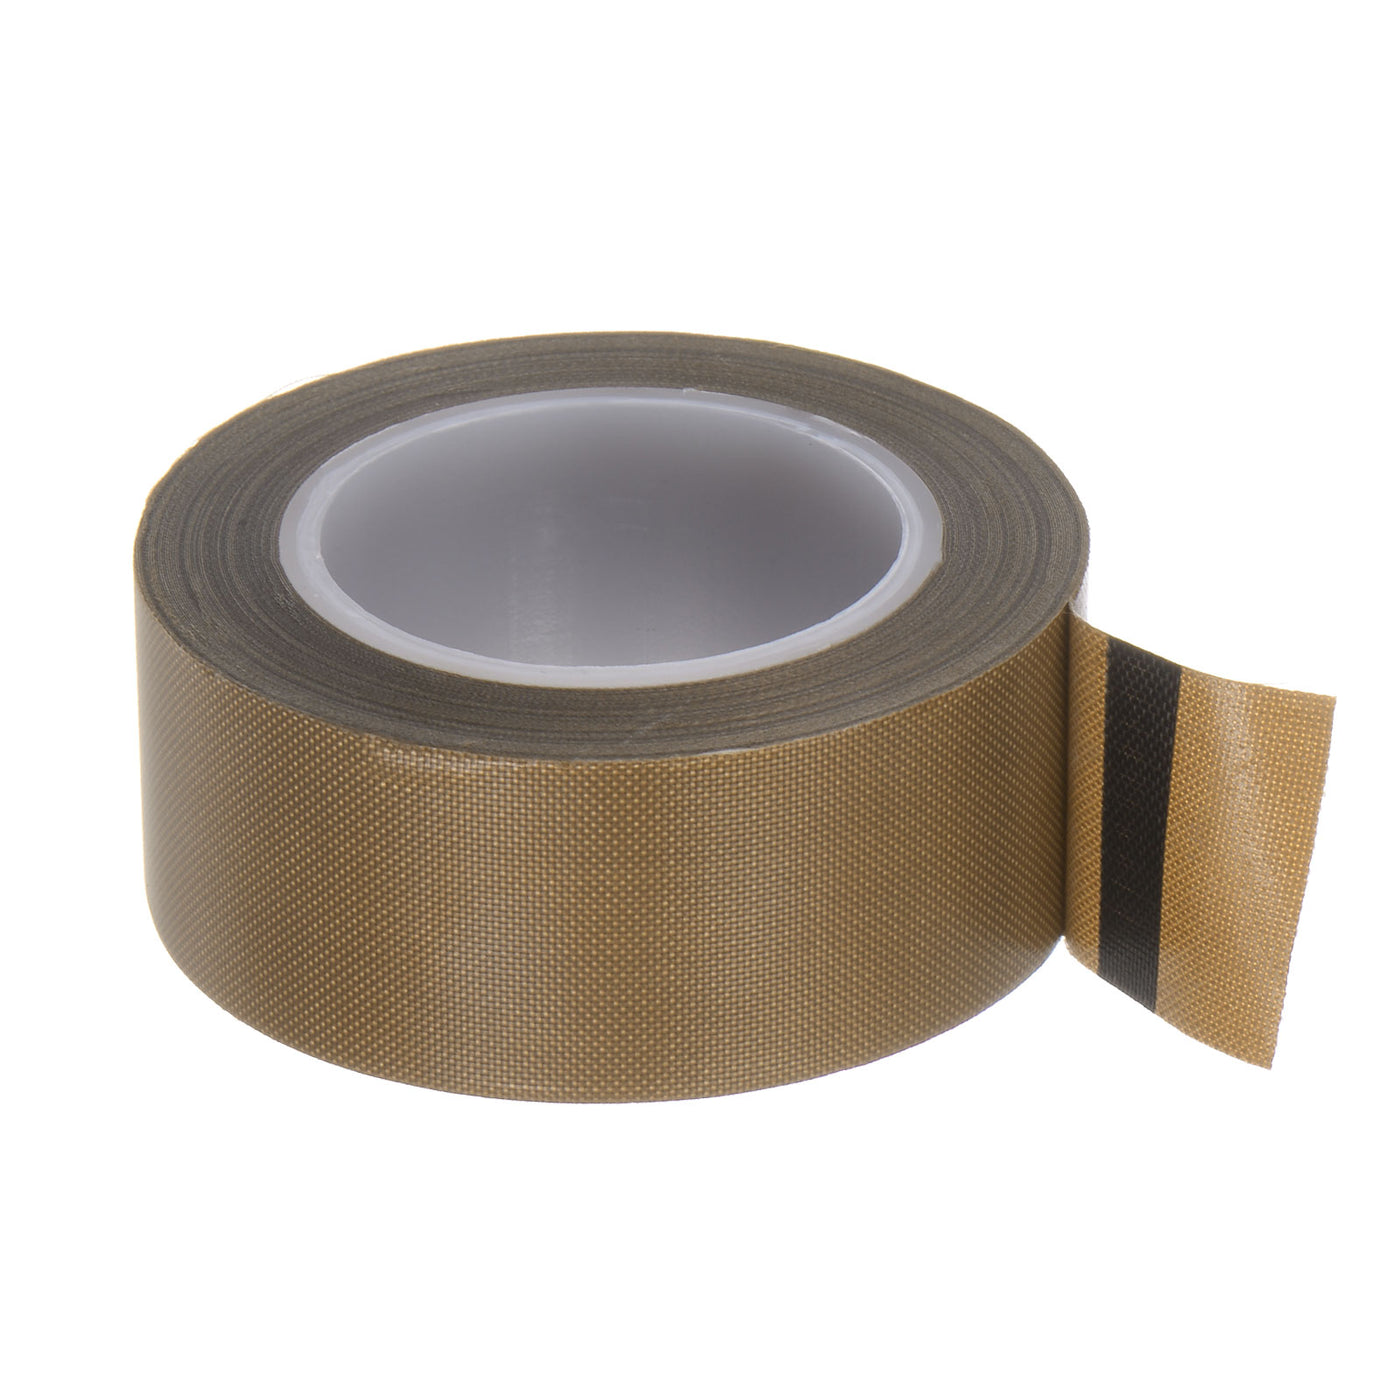 Harfington Fabric PTFE Tape 1"x33ft PTFE Adhesive Tape 0.18mm Thickness Brown